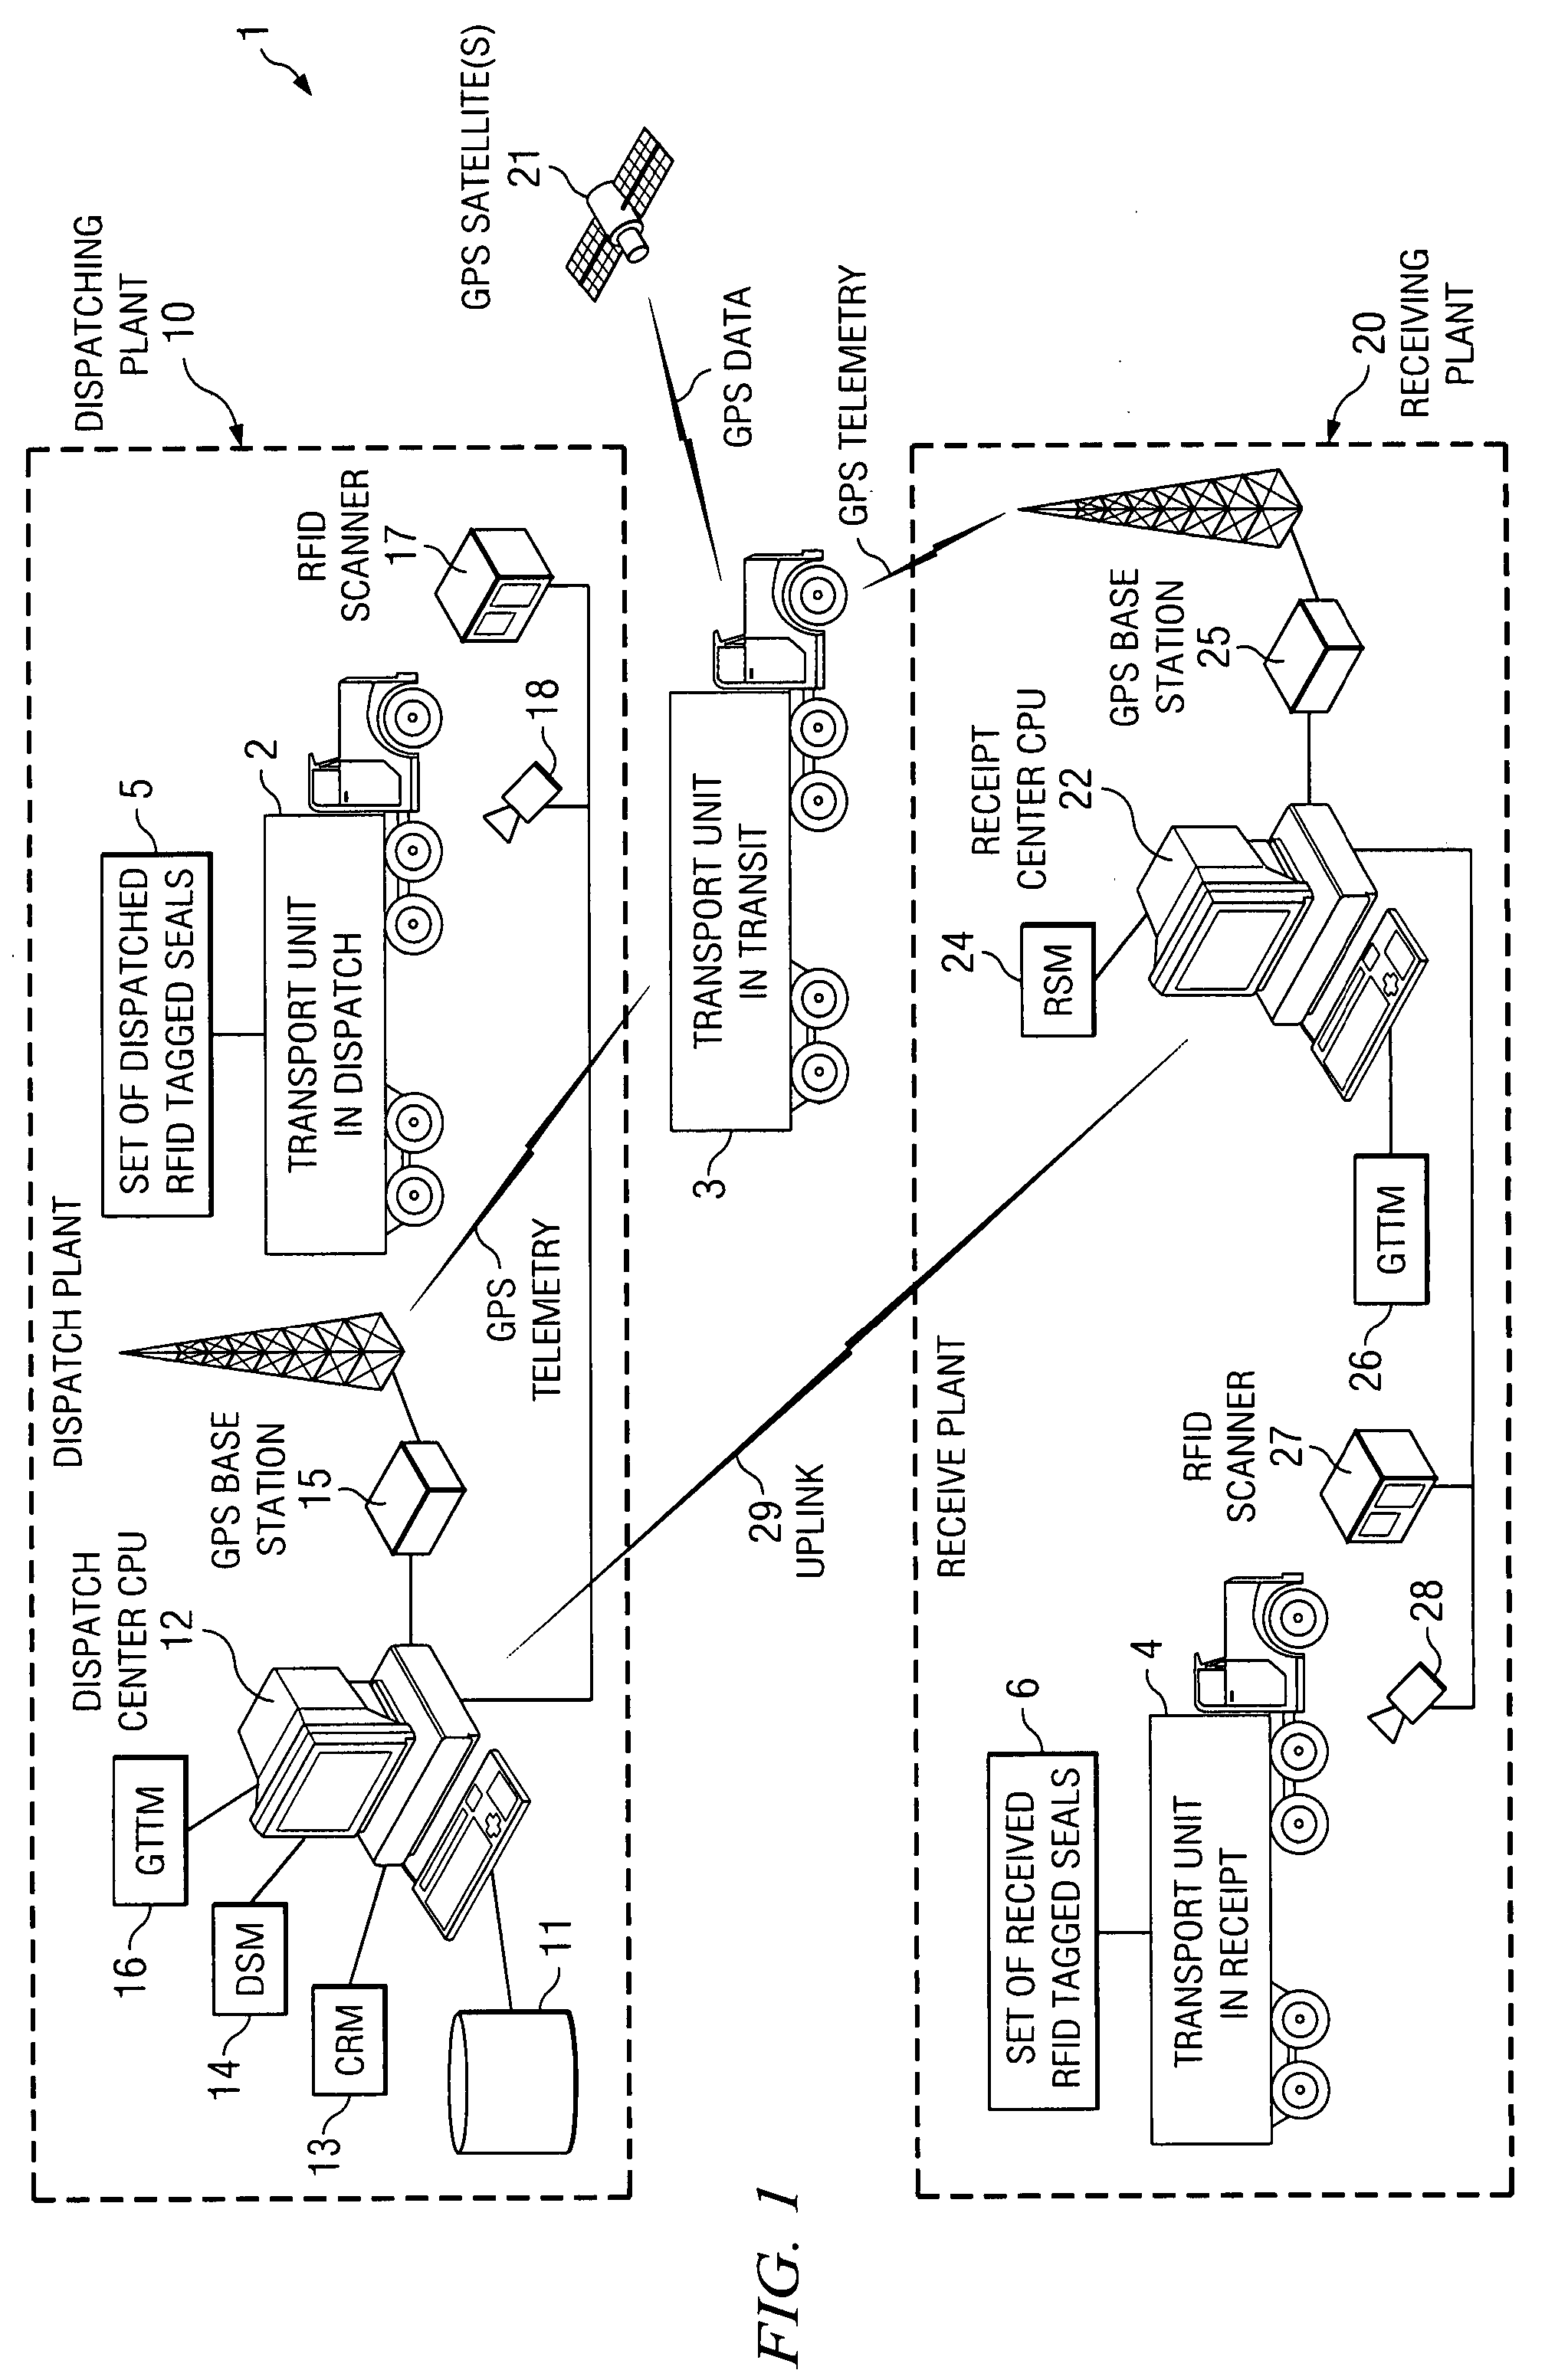 System and method for transport security control and tracking